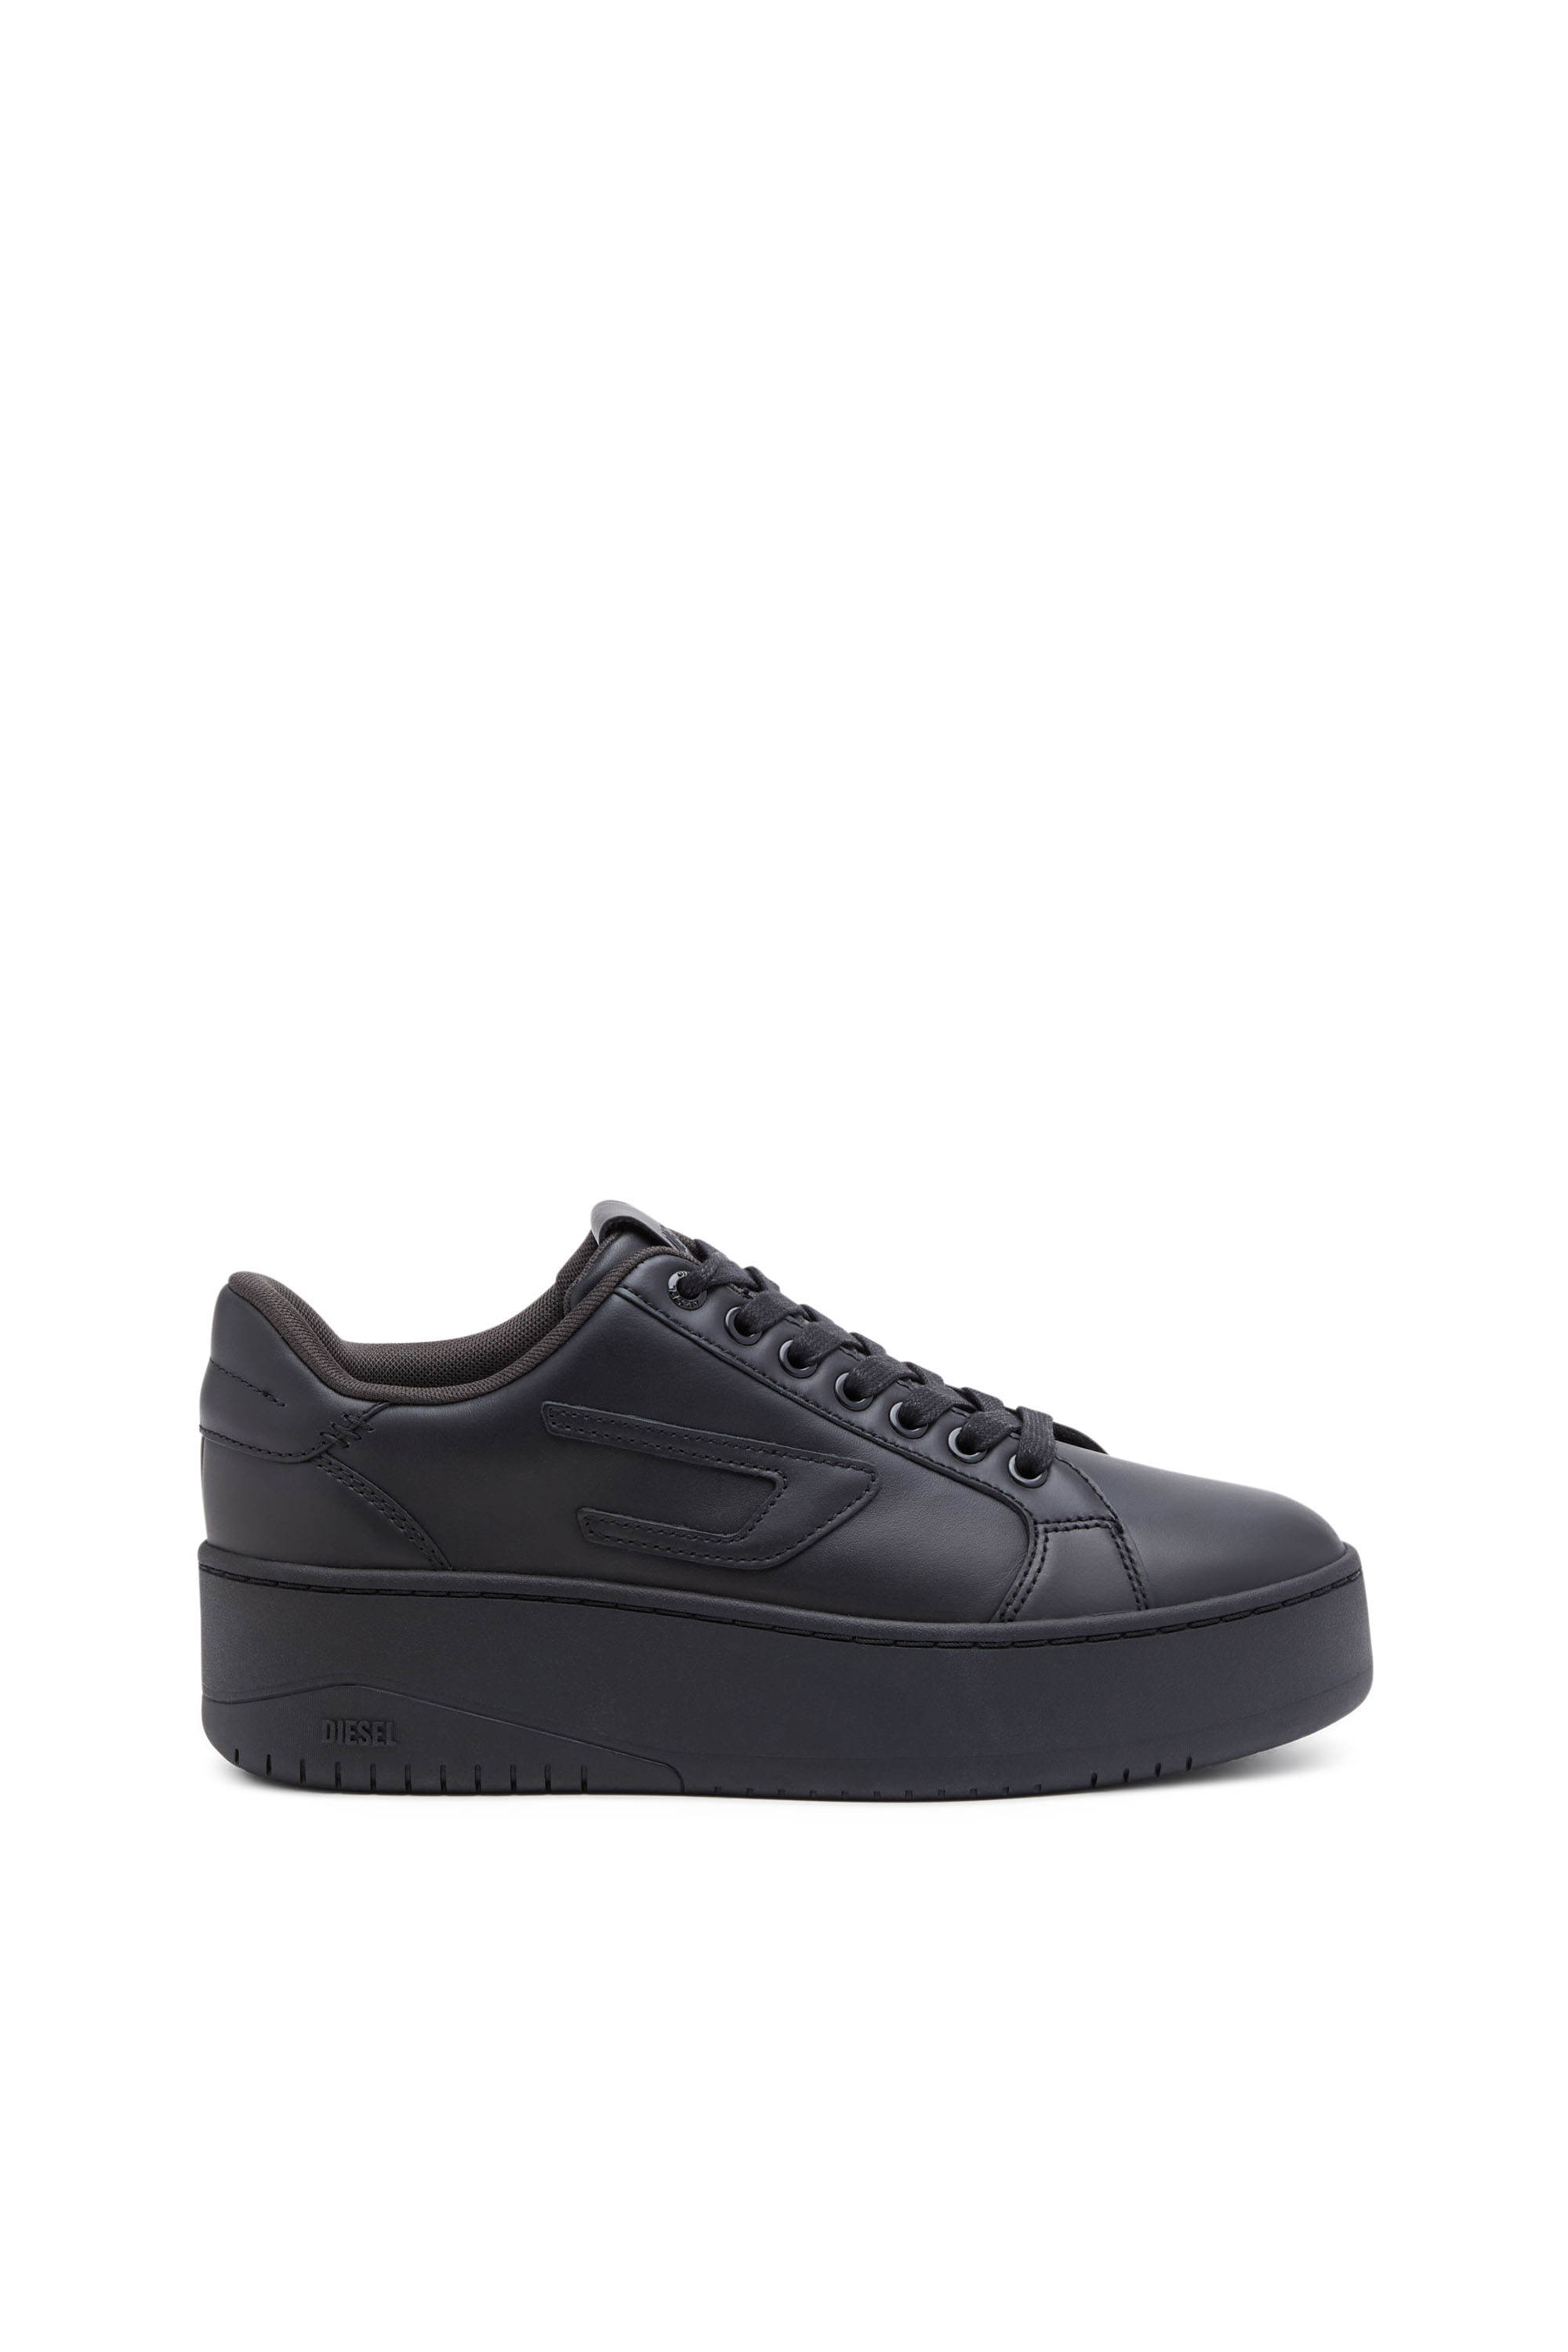 Diesel - S-ATHENE BOLD X, Woman S-Athene Bold-Flatform sneakers in leather in Black - Image 1